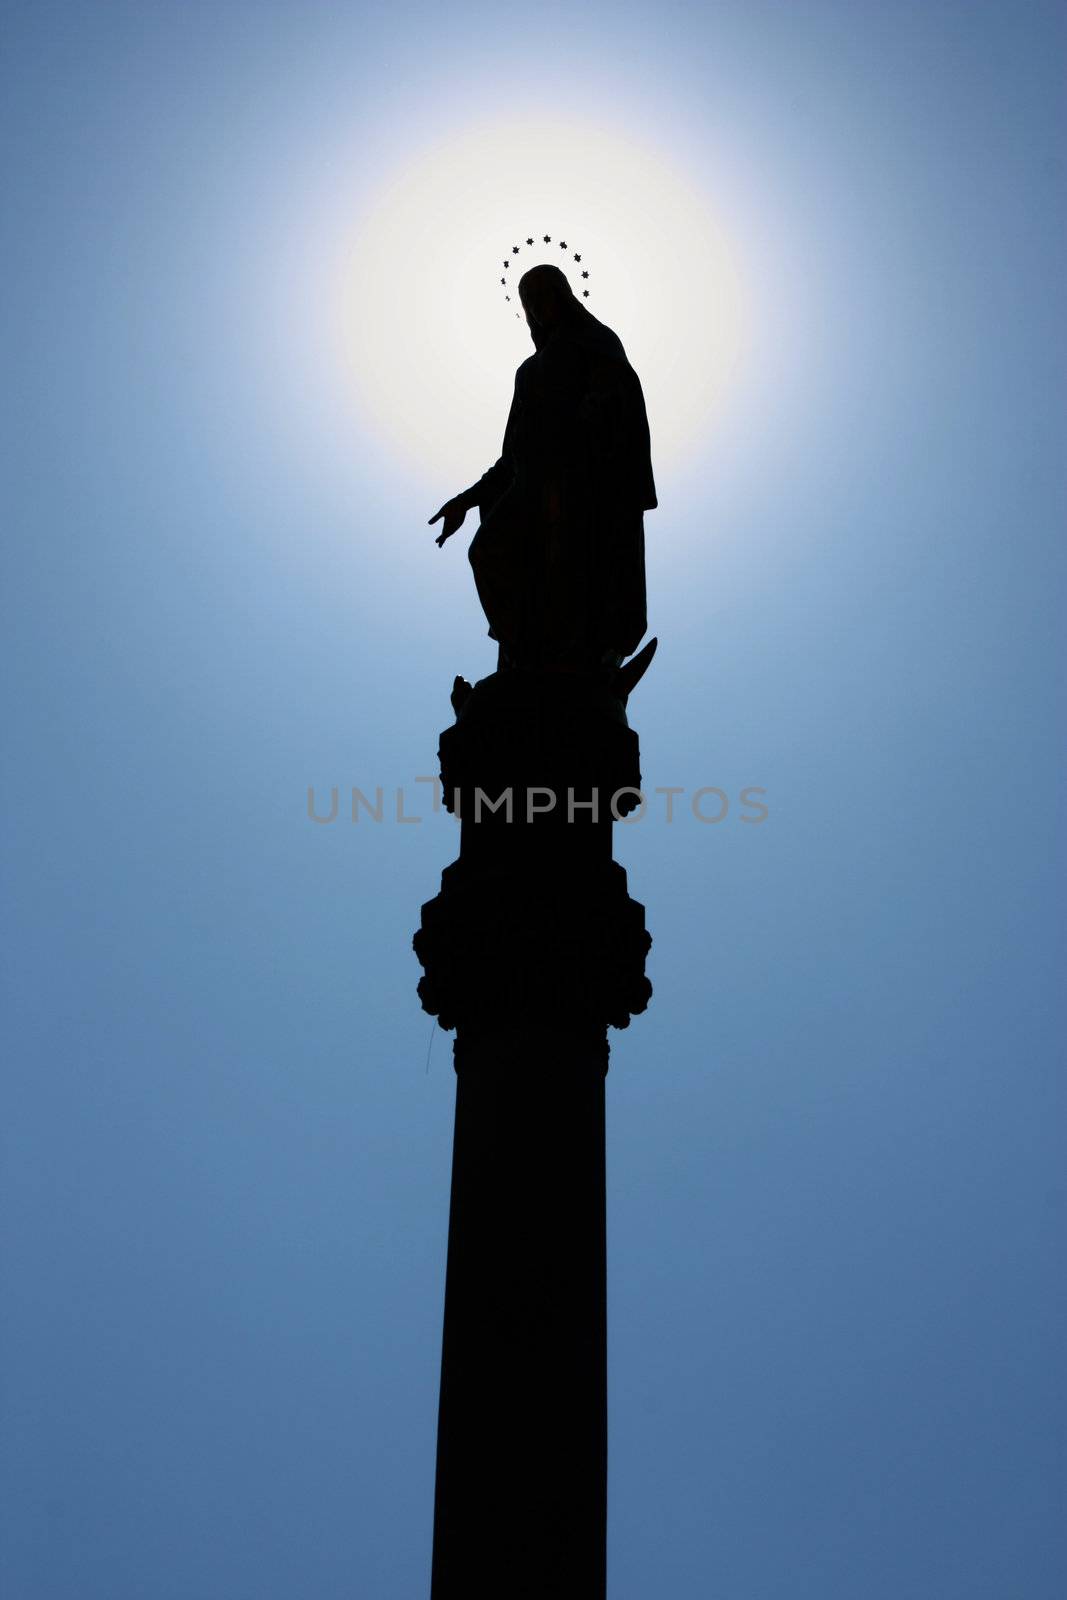 Statue of the Blessed Virgin Mary near cathedral in Zagreb, Croatia